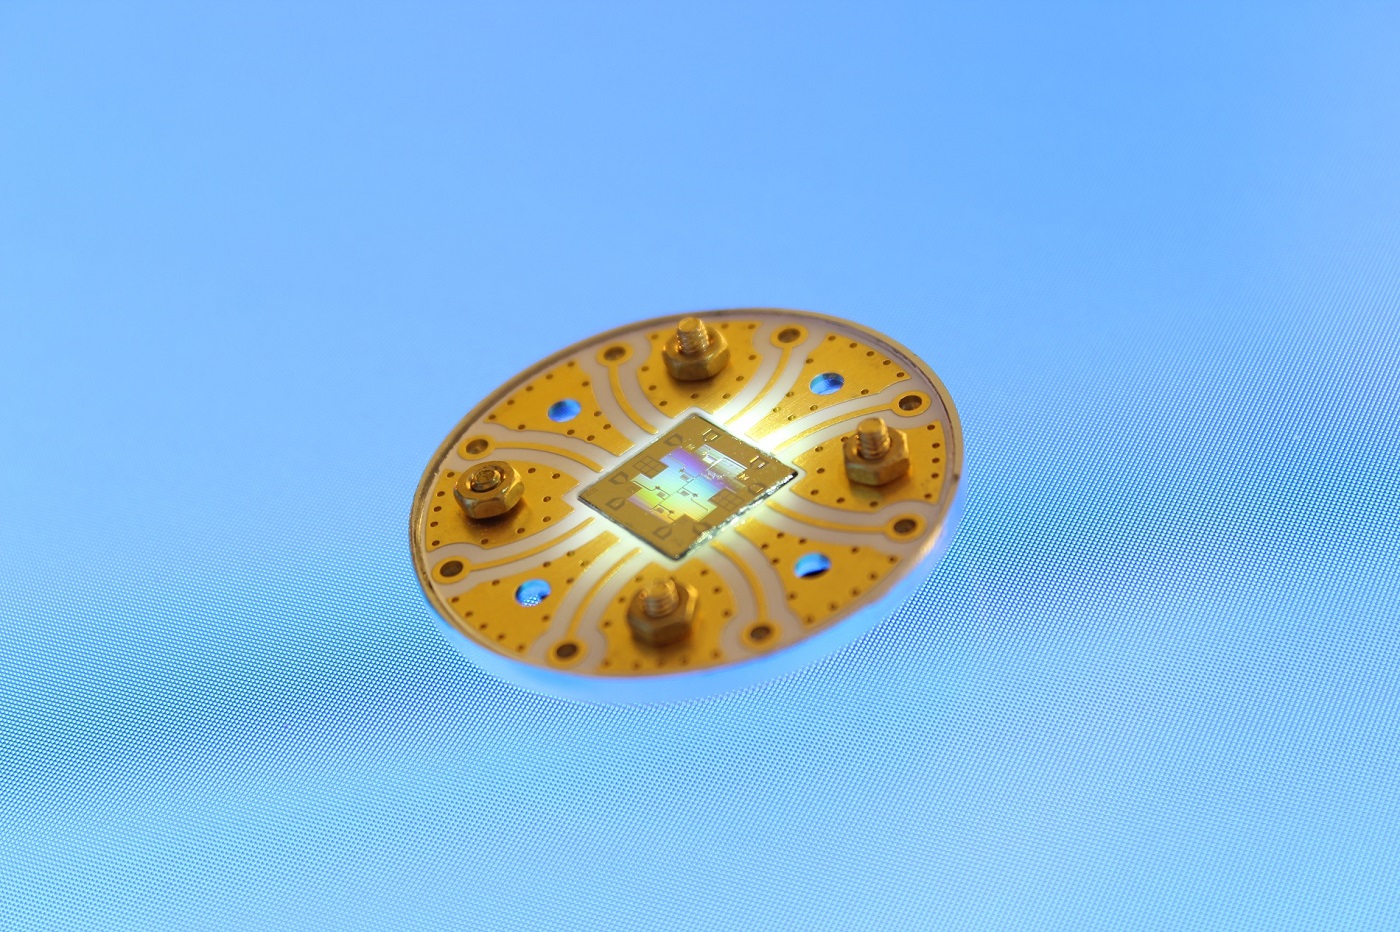 Quantum chip mounted on a sample holder